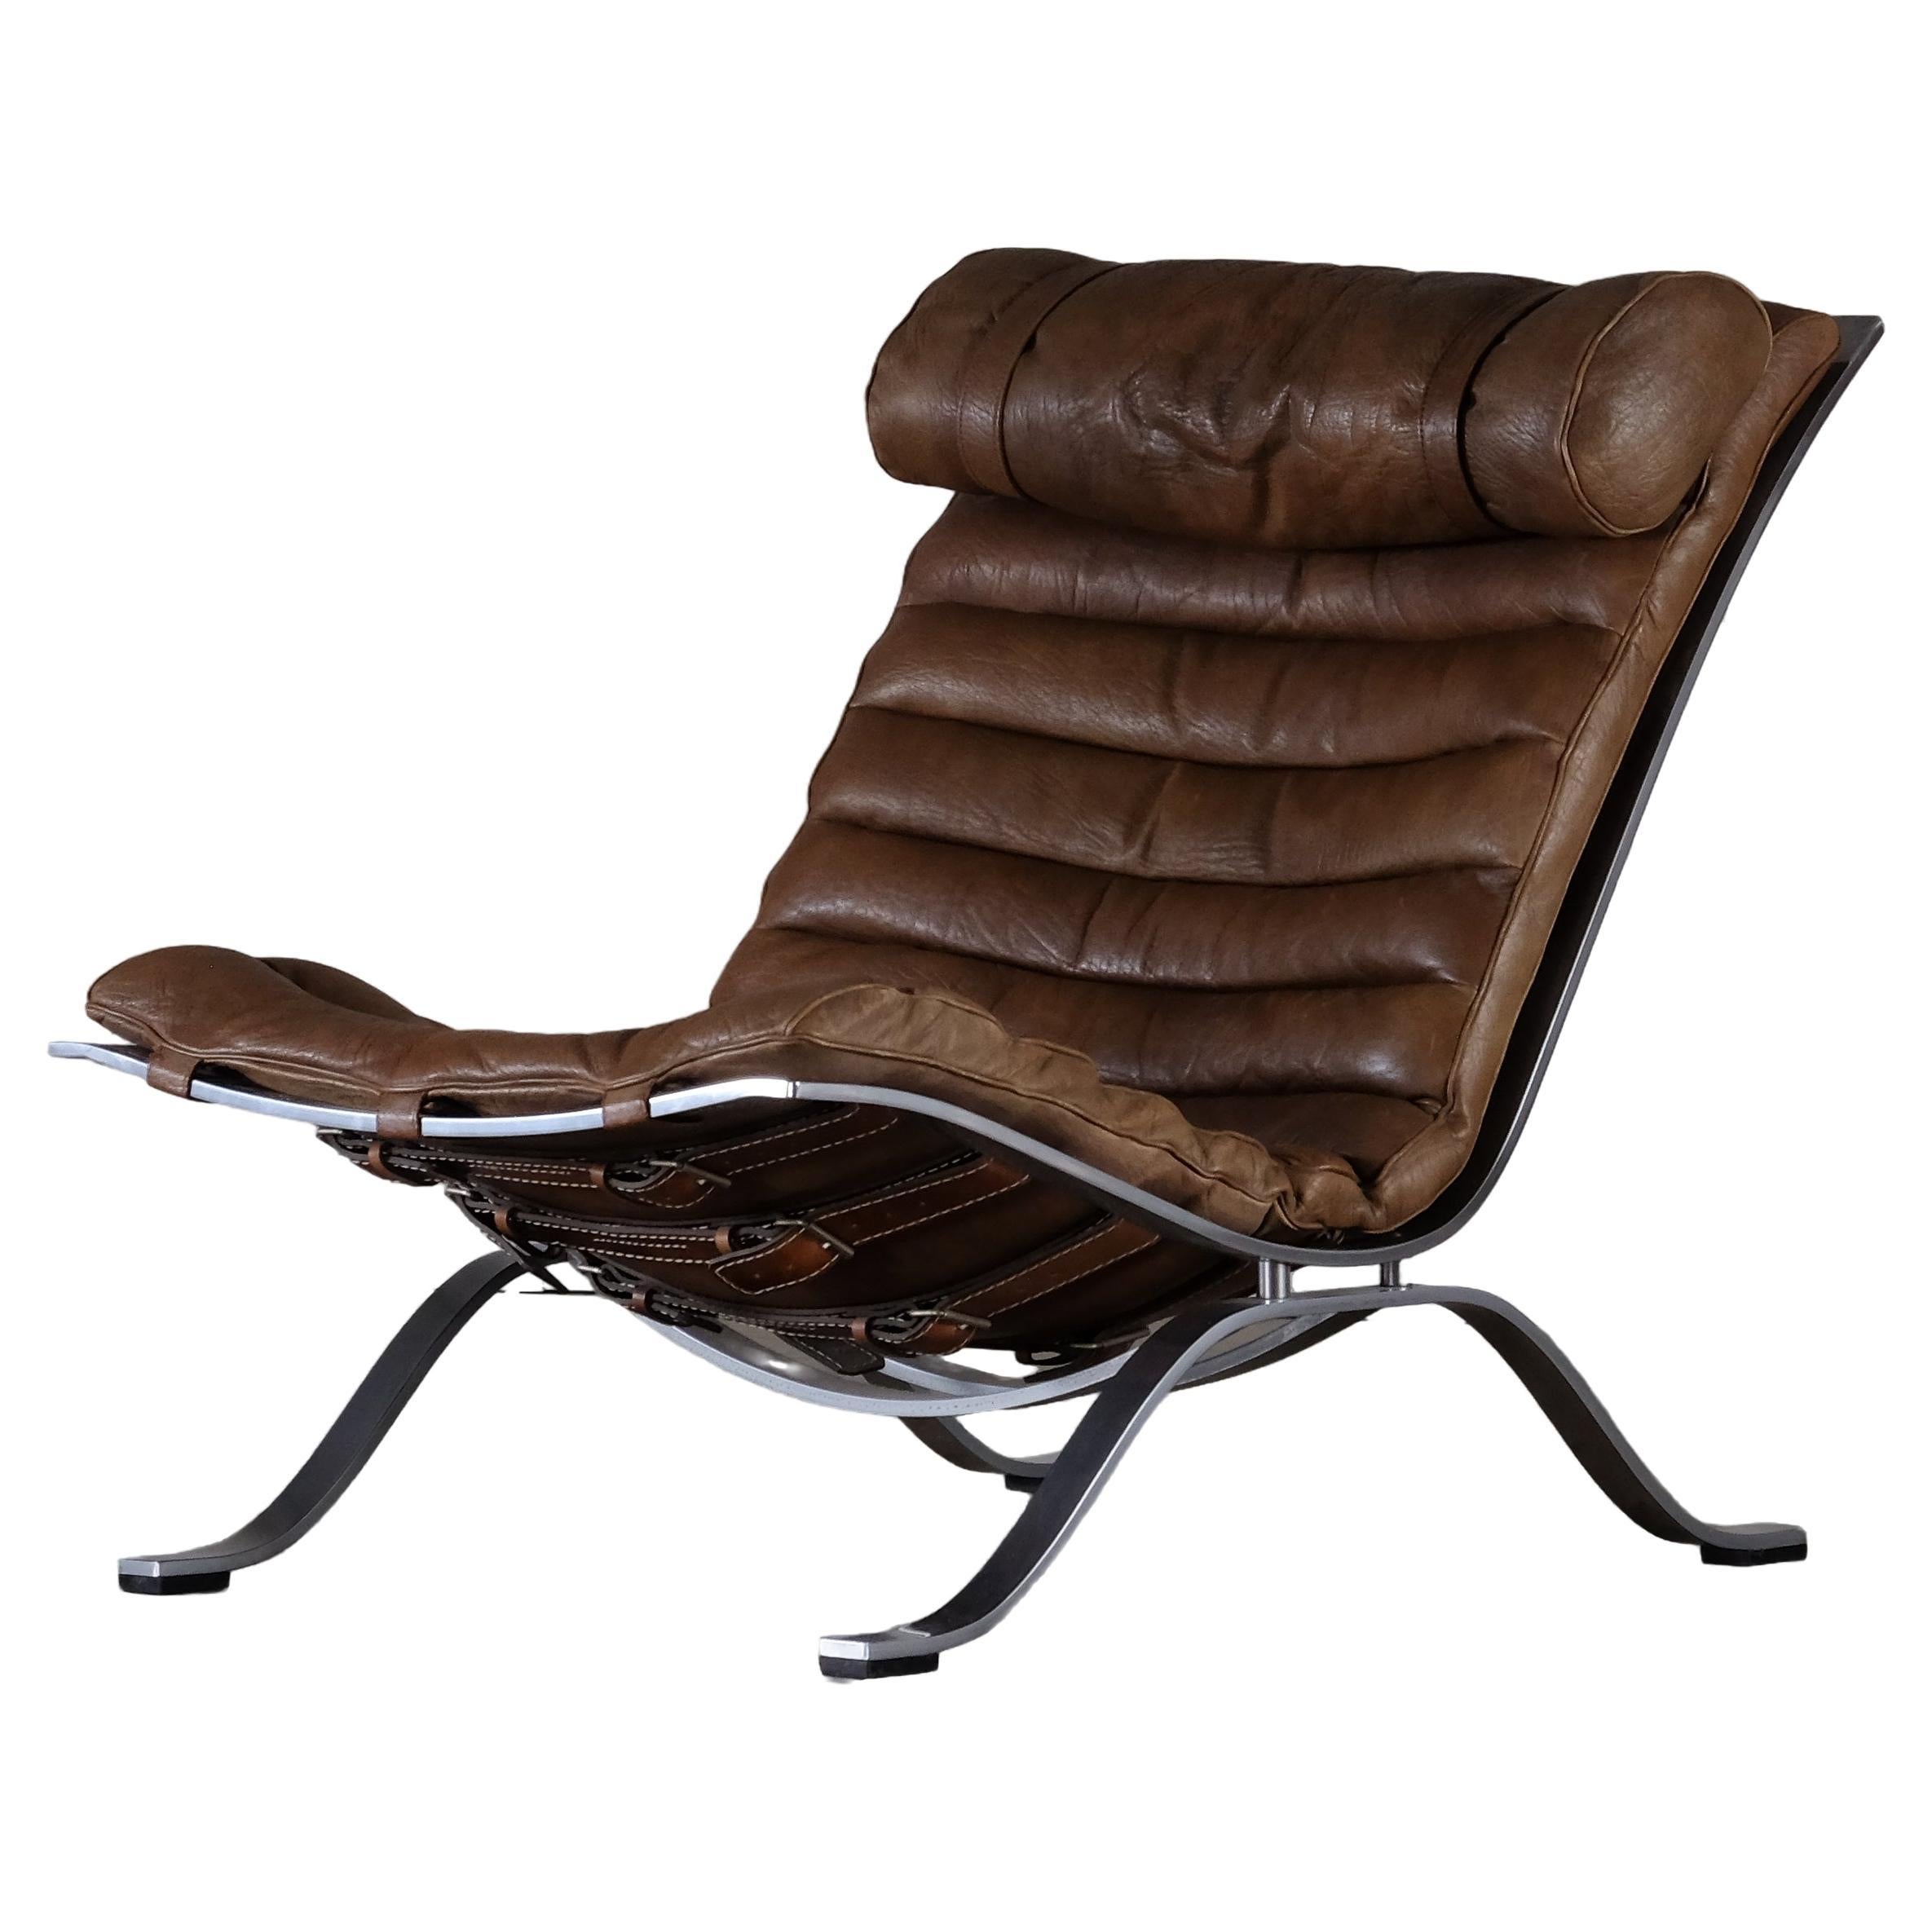 Arne Norell 'Ari' Easy Chair in Brown Leather, Sweden, 1970s For Sale